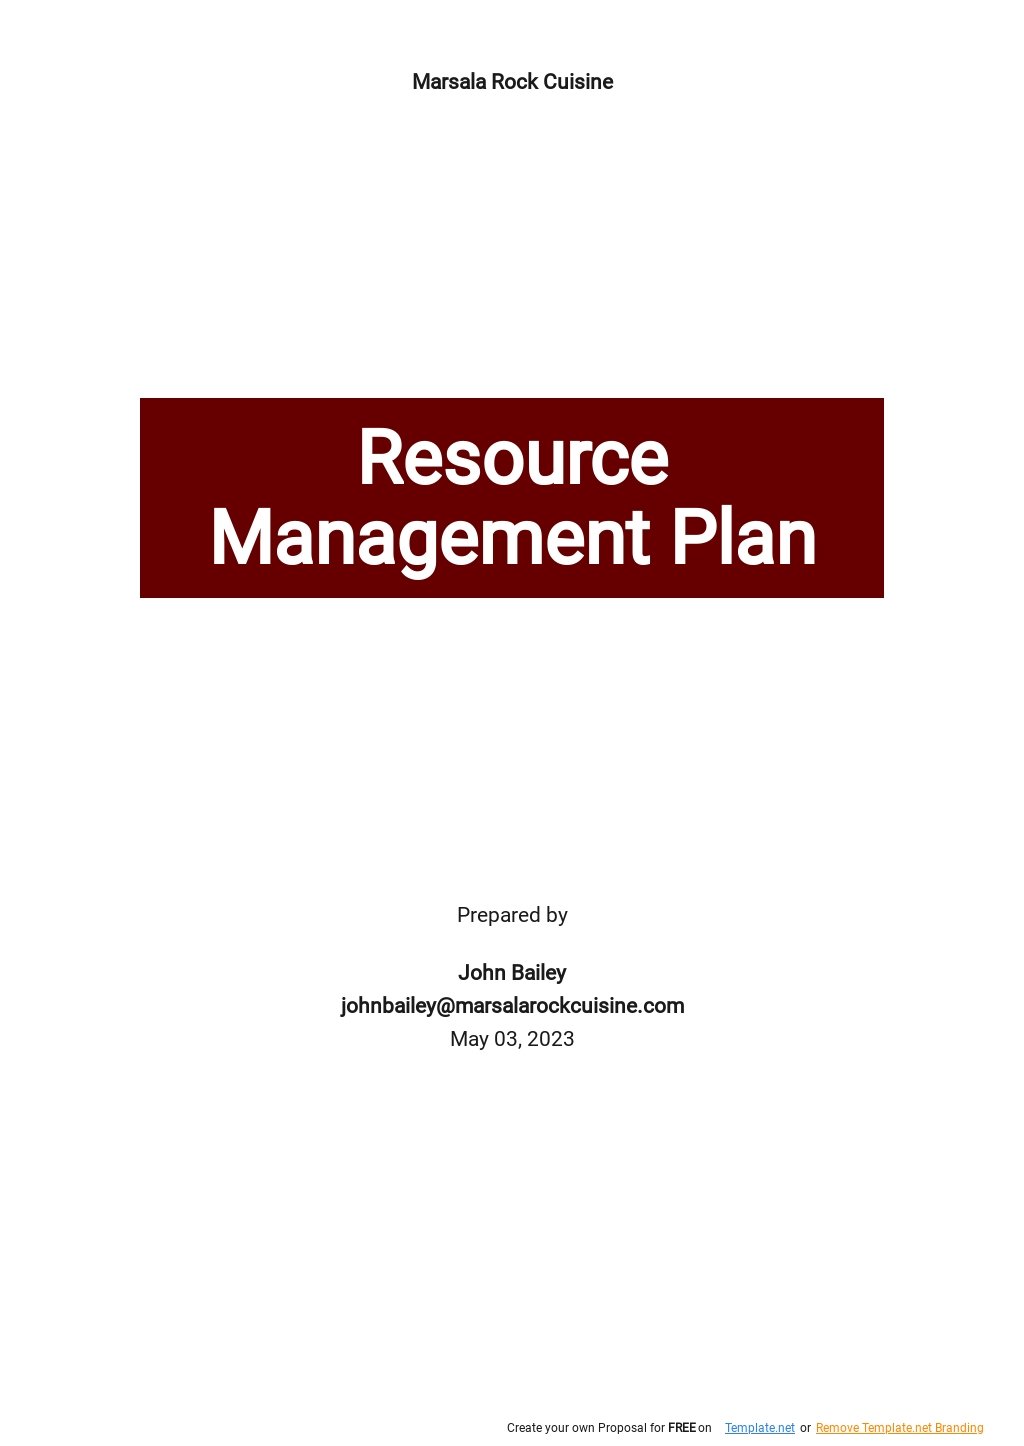 Project Resource Management Plan Template